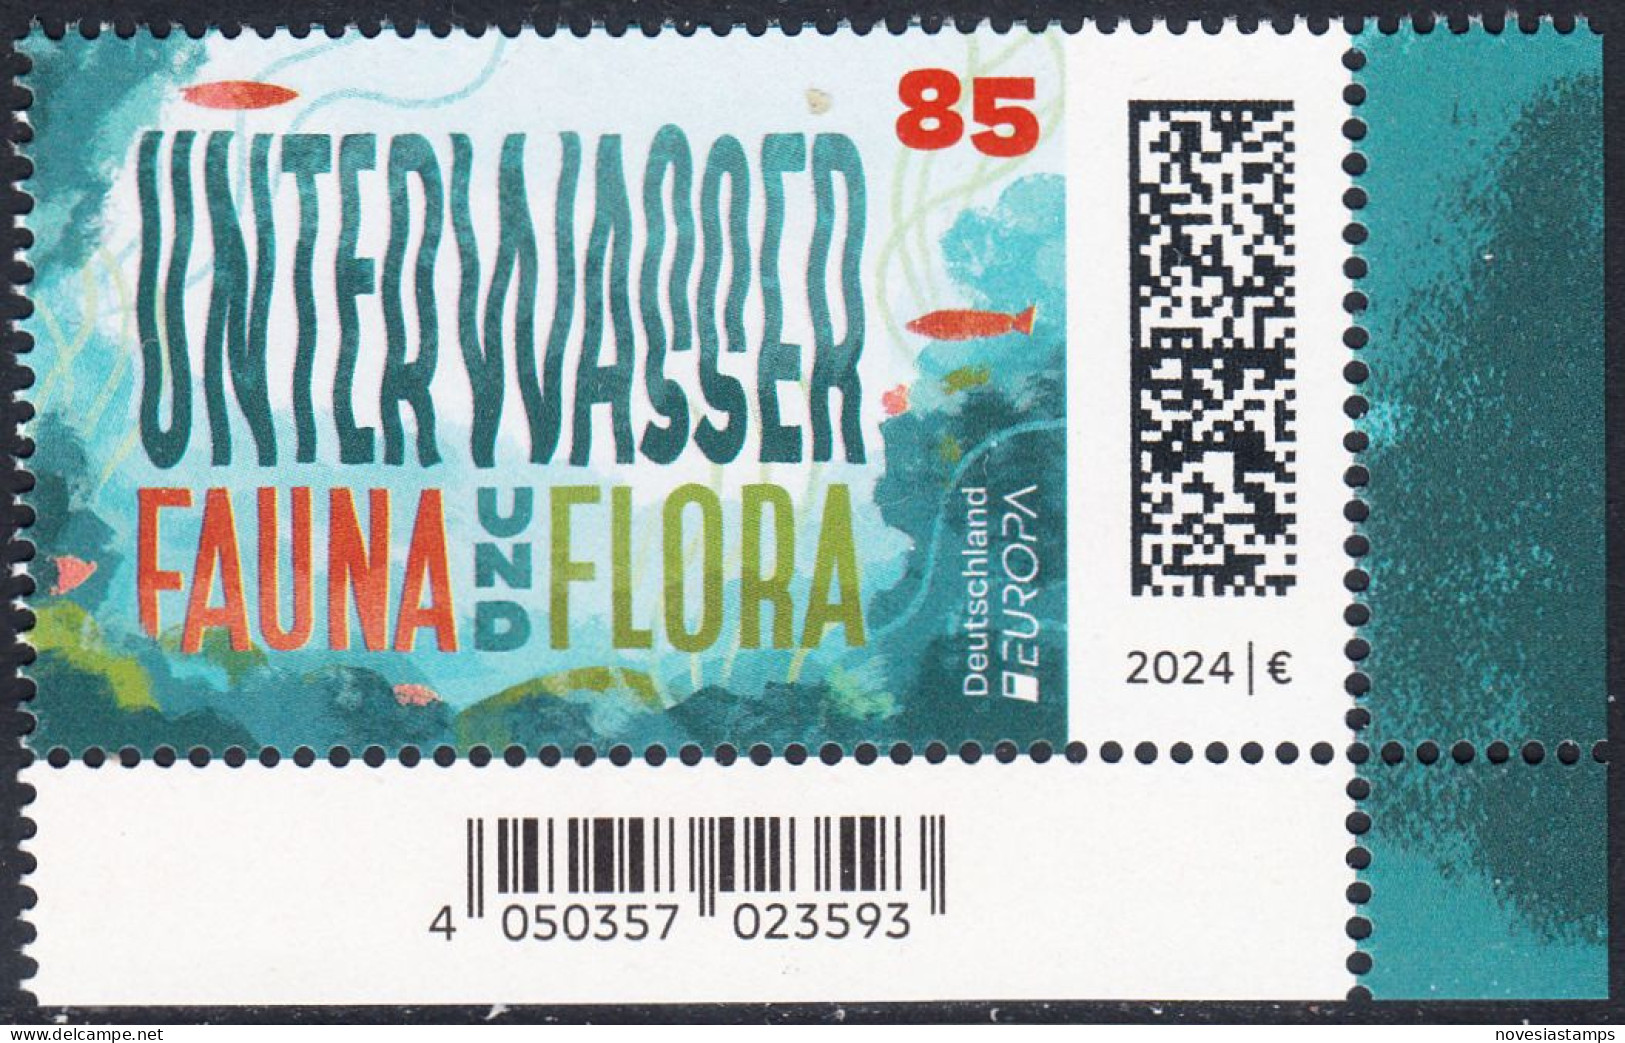 !a! GERMANY 2024 Mi. 3828 MNH SINGLE From Lower Right Corner - Europe: Underwater Fauna & Flora - Unused Stamps